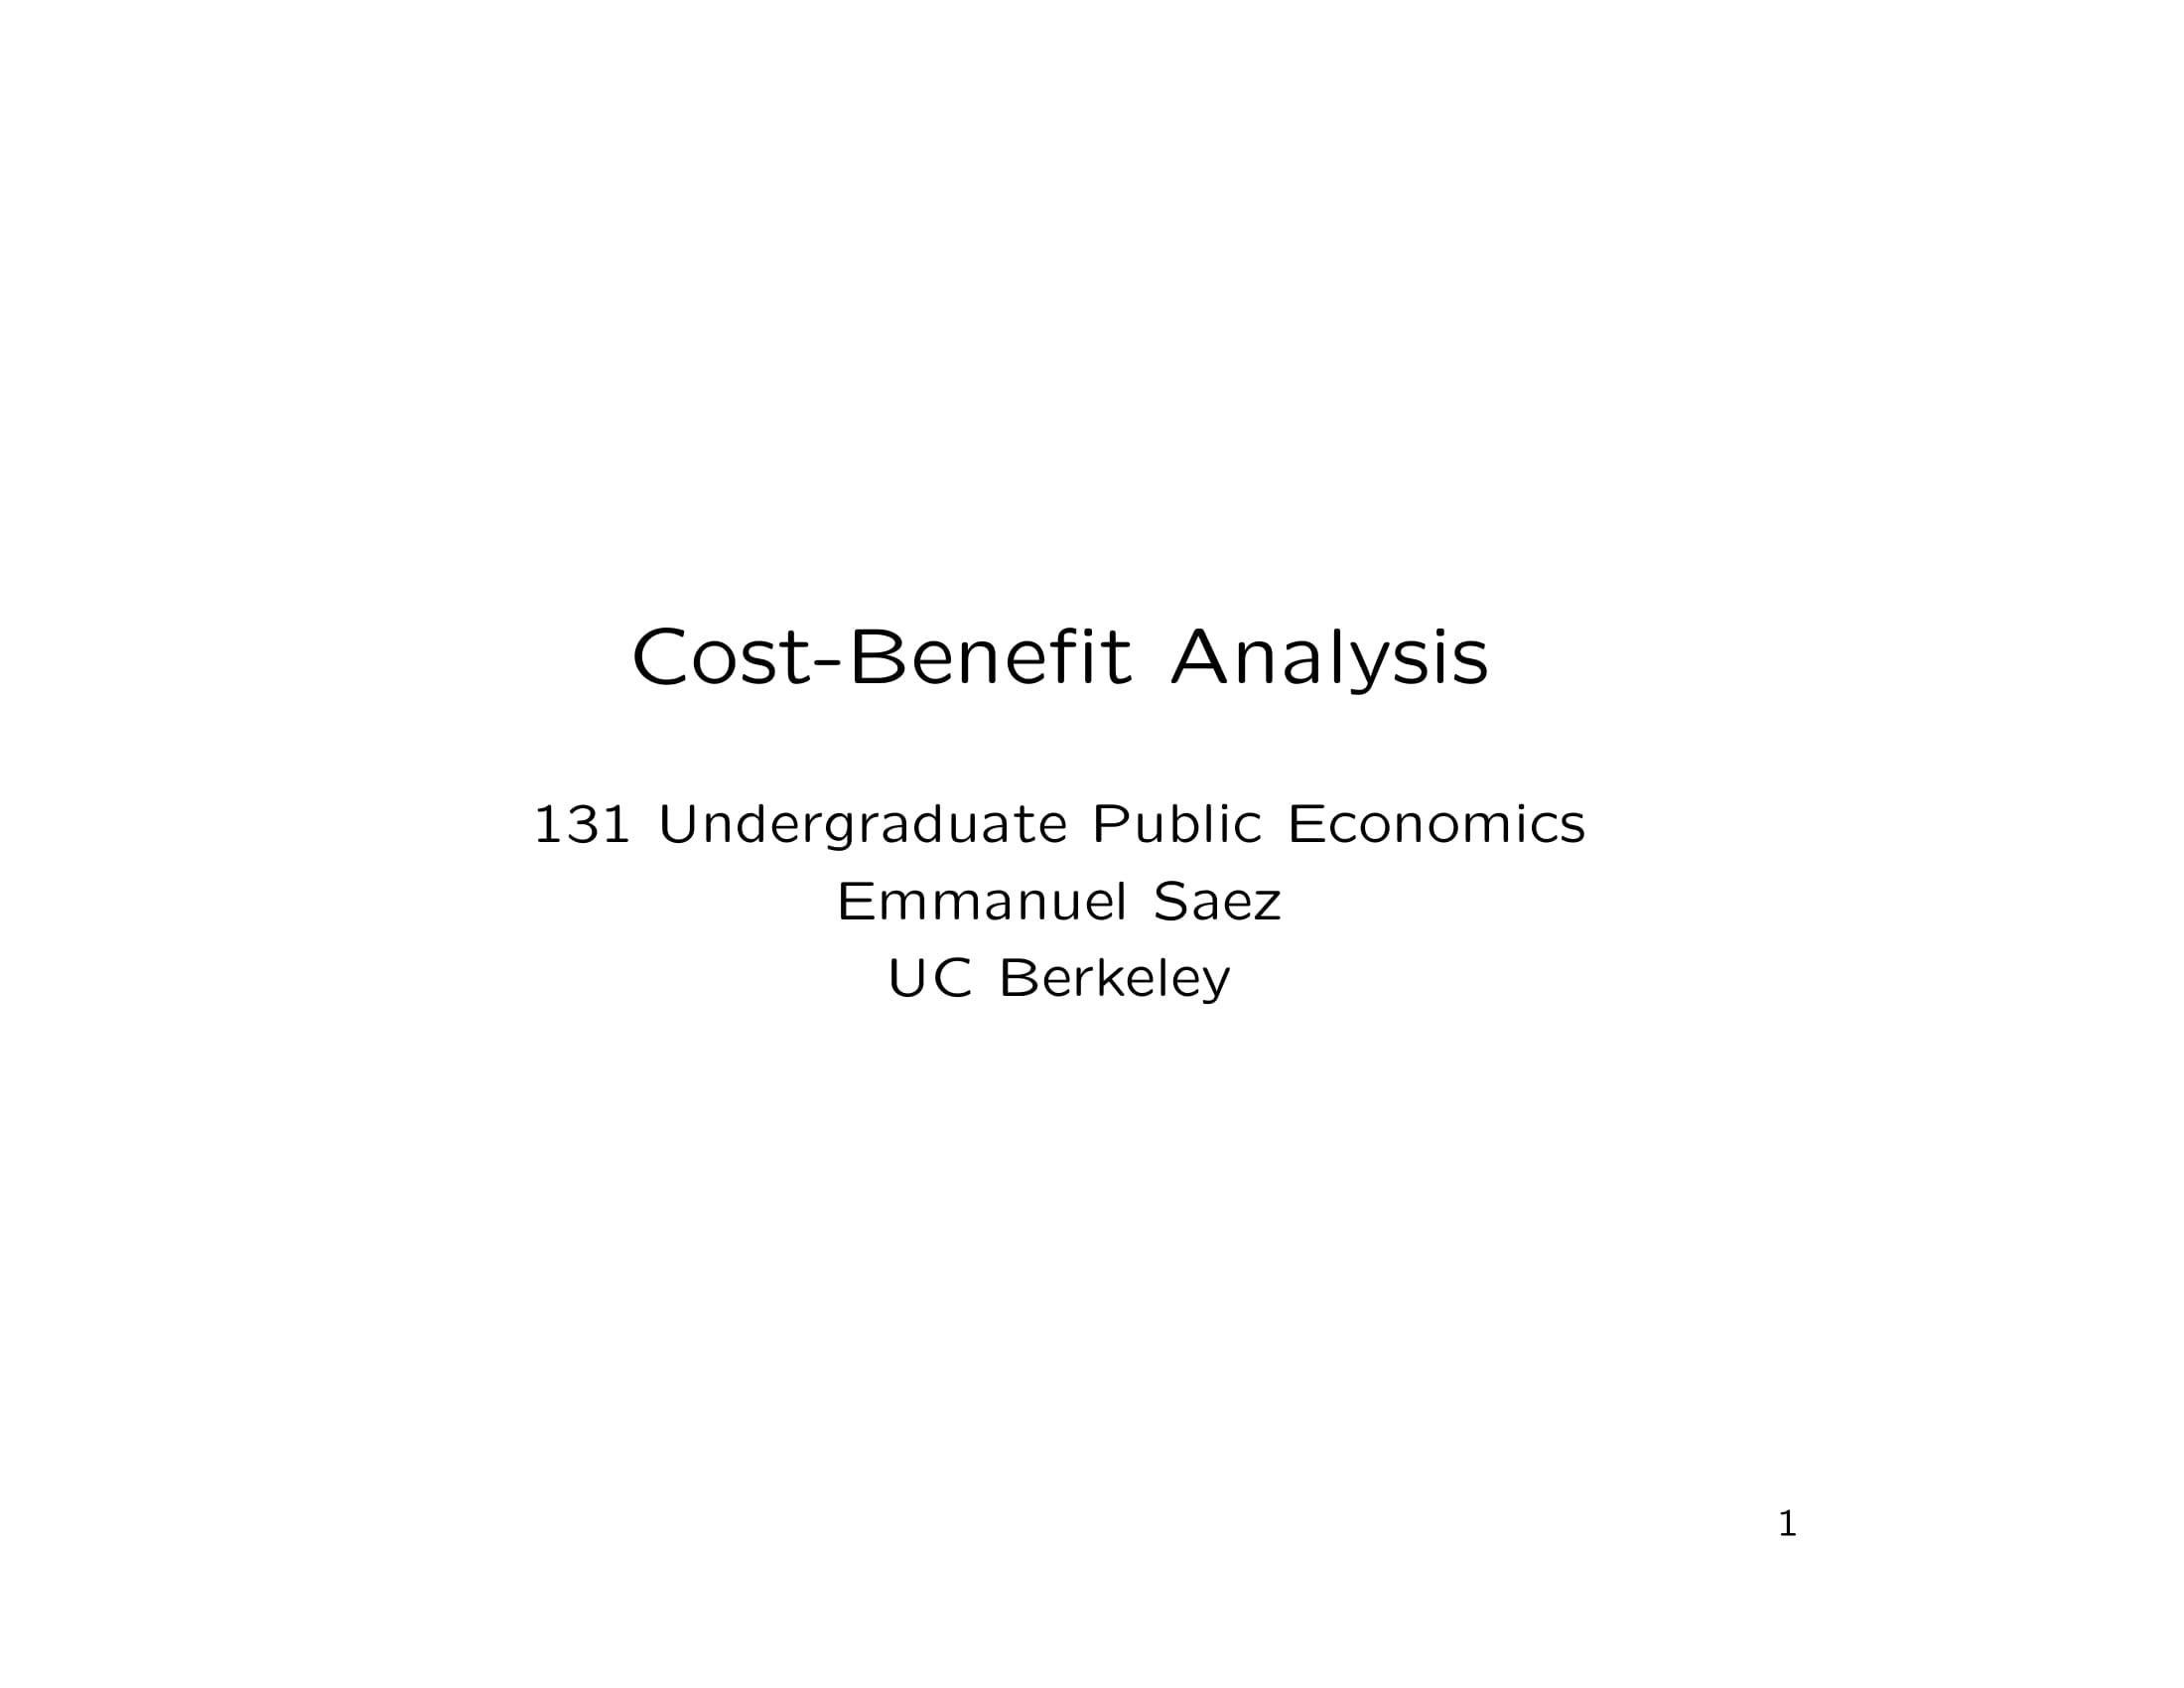 detailed cost analysis example